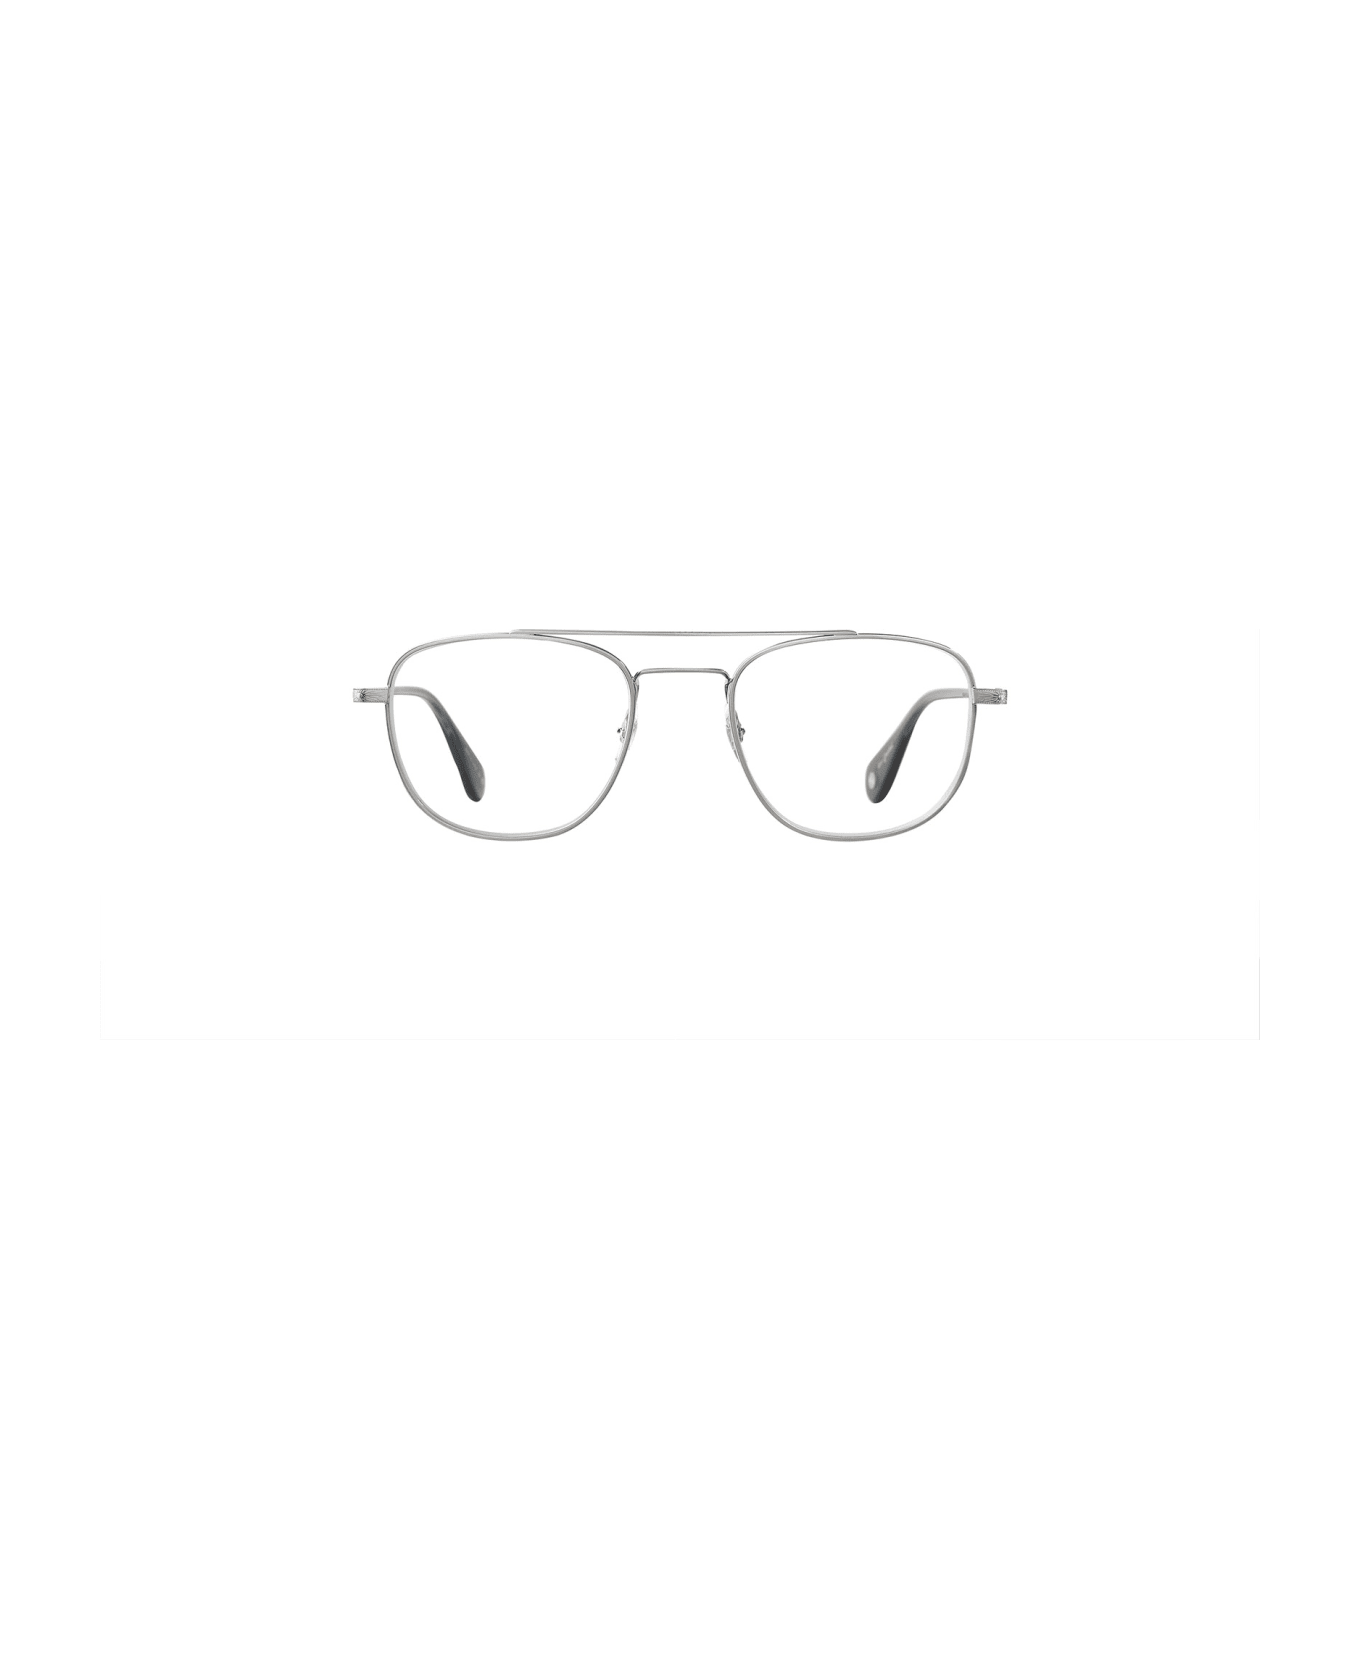 Garrett Leight Clubhouse Ii Brushed Silver Glasses - Brushed Silver アイウェア